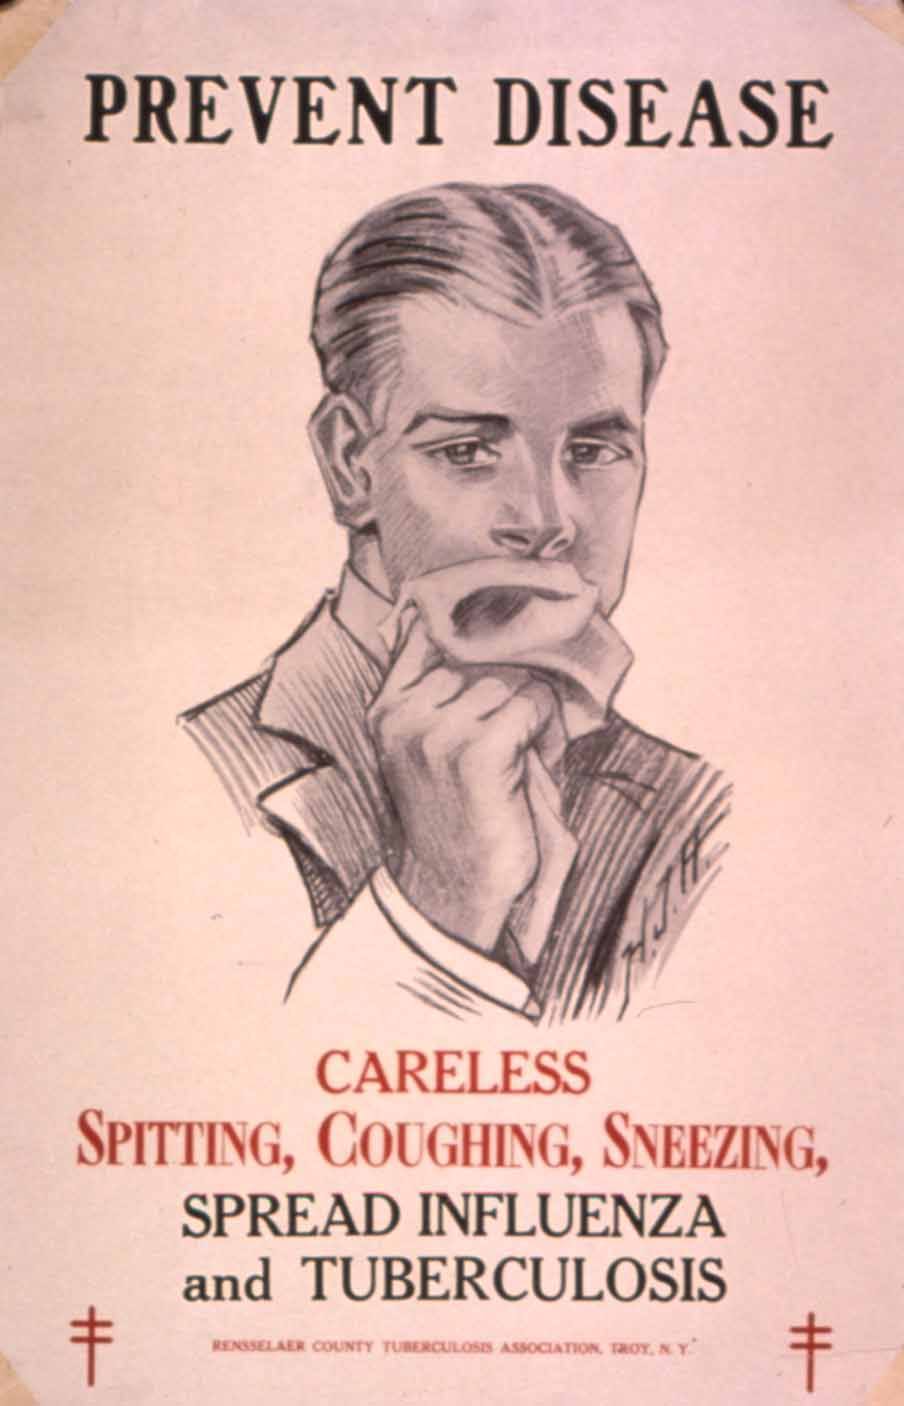 A Health Education Poster From The Famous 1918 Spanish Flu Reminding Us That Our Cough Hygiene (And Spitting Too!) Is Important In Disease Prevention